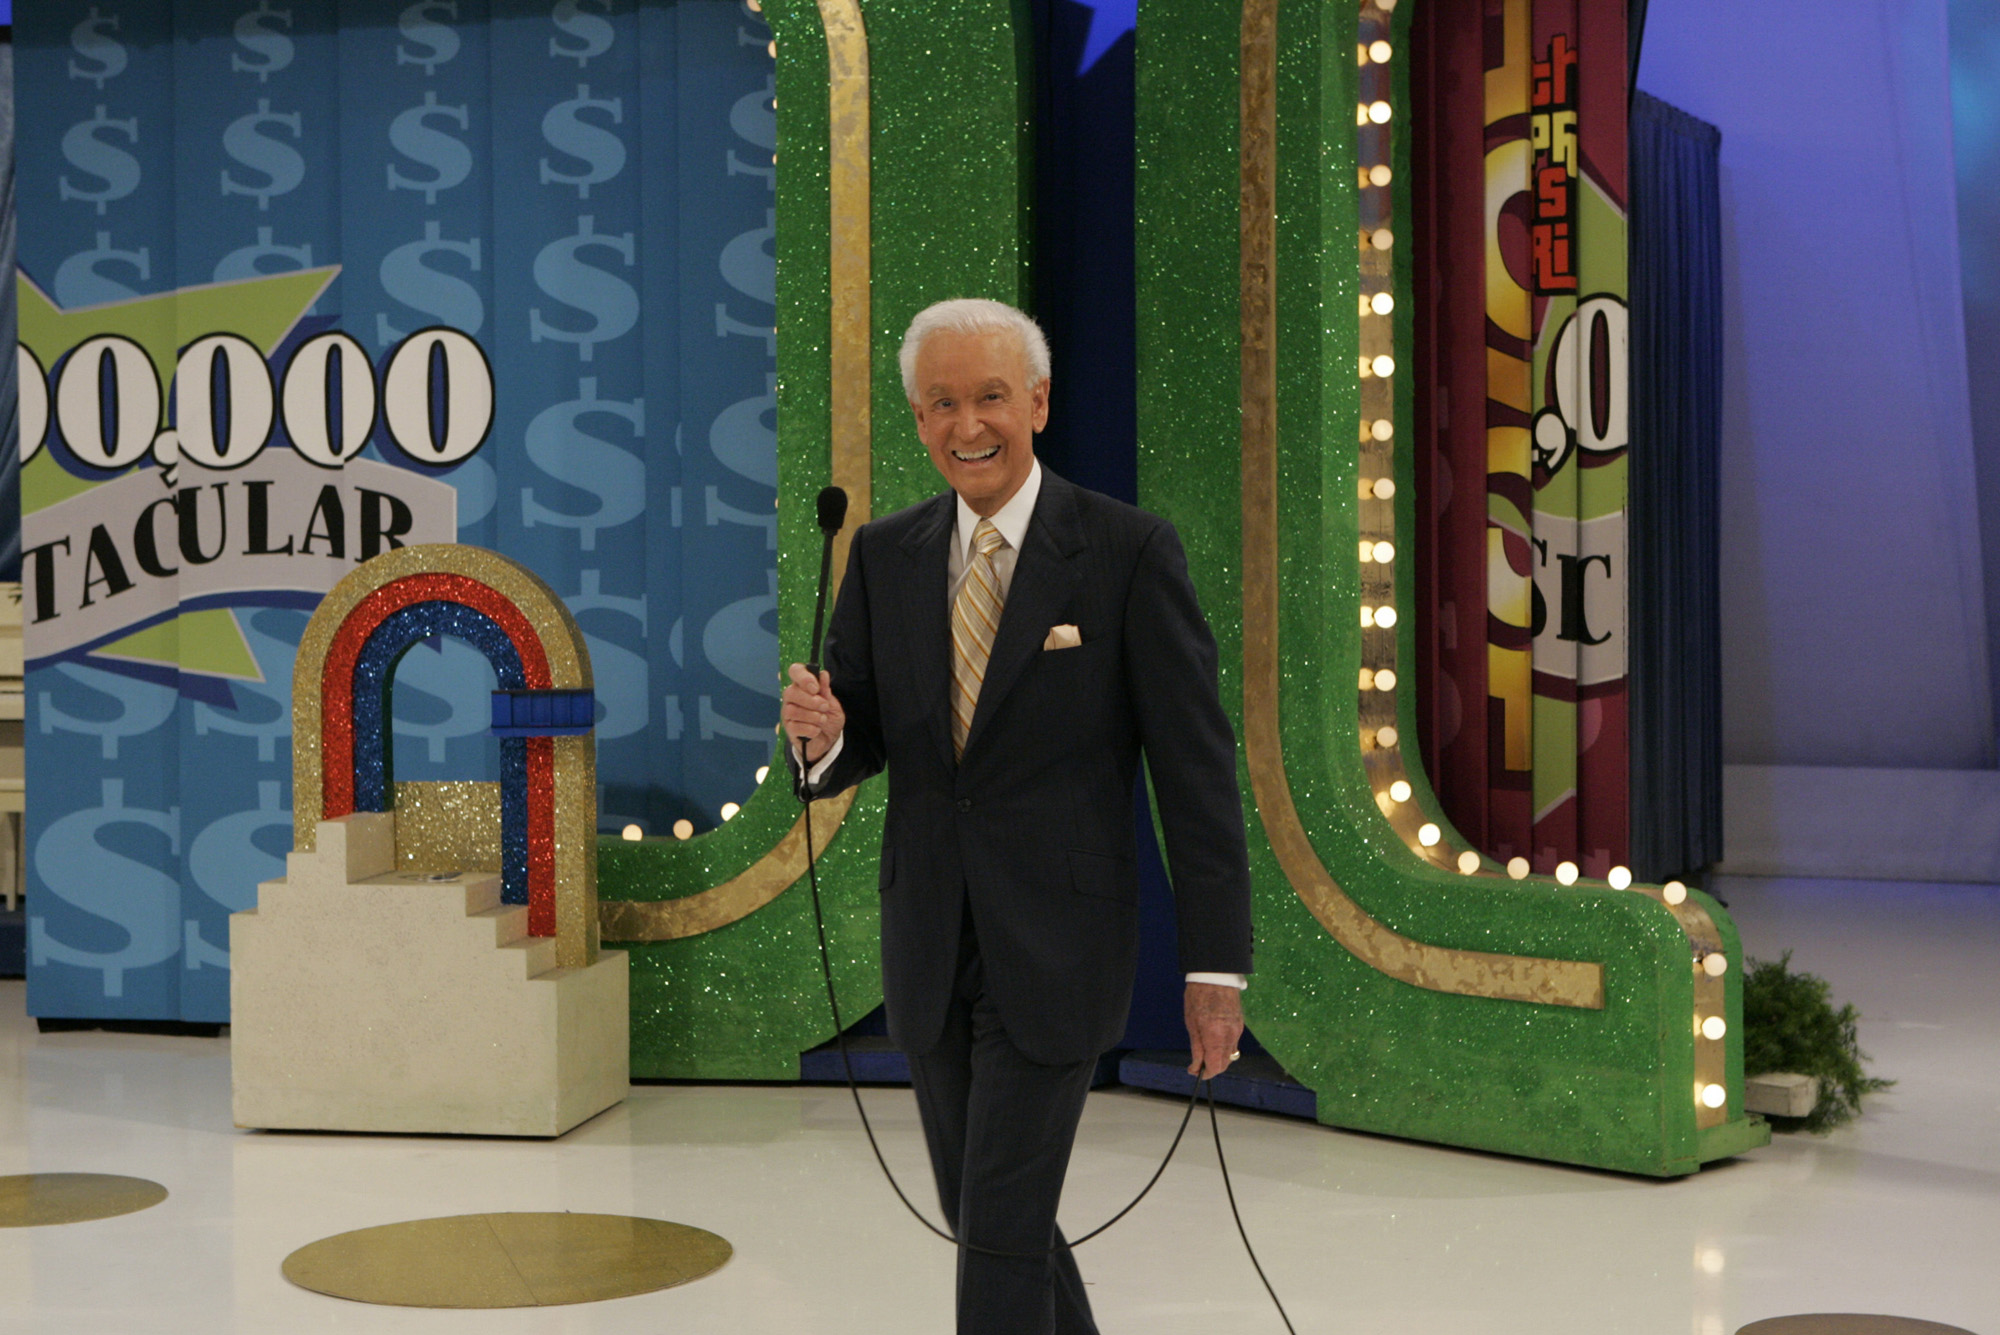 CBS Releases Statement on Death of Bob Barker